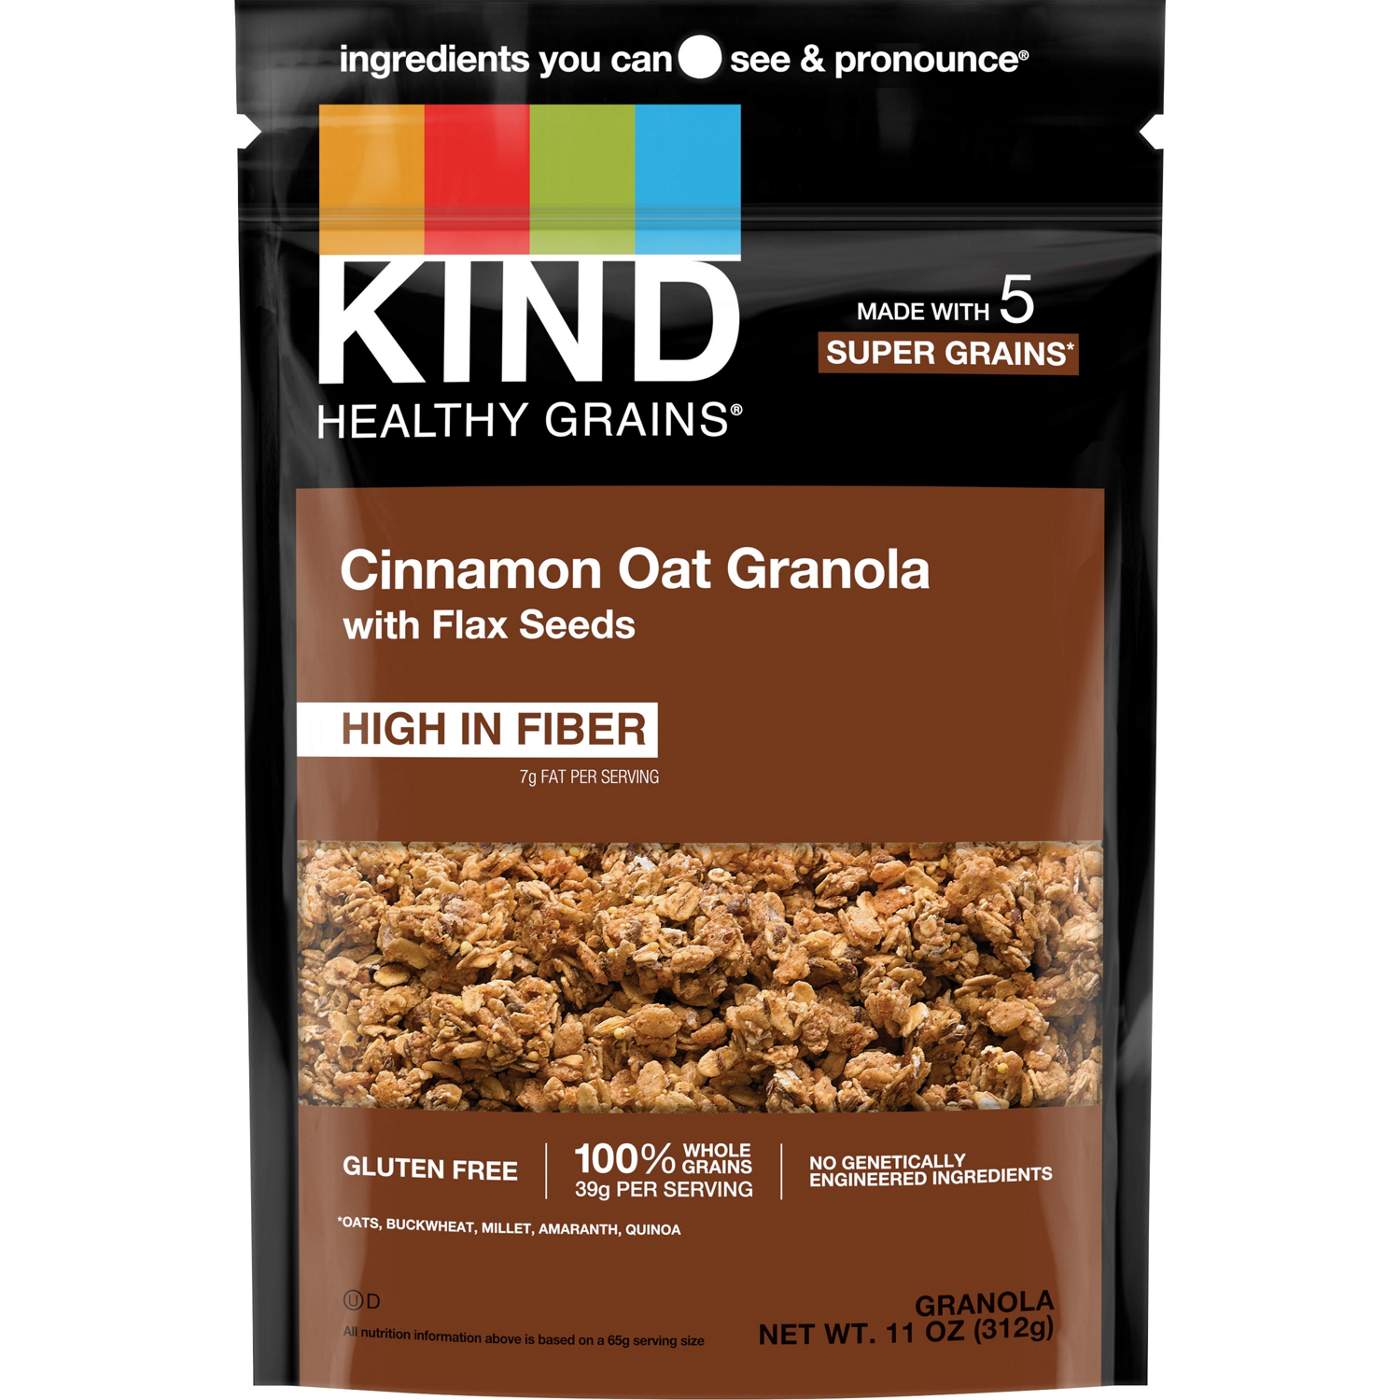 Kind Healthy Grains Granola - Cinnamon Oat with Flax Seeds; image 1 of 3